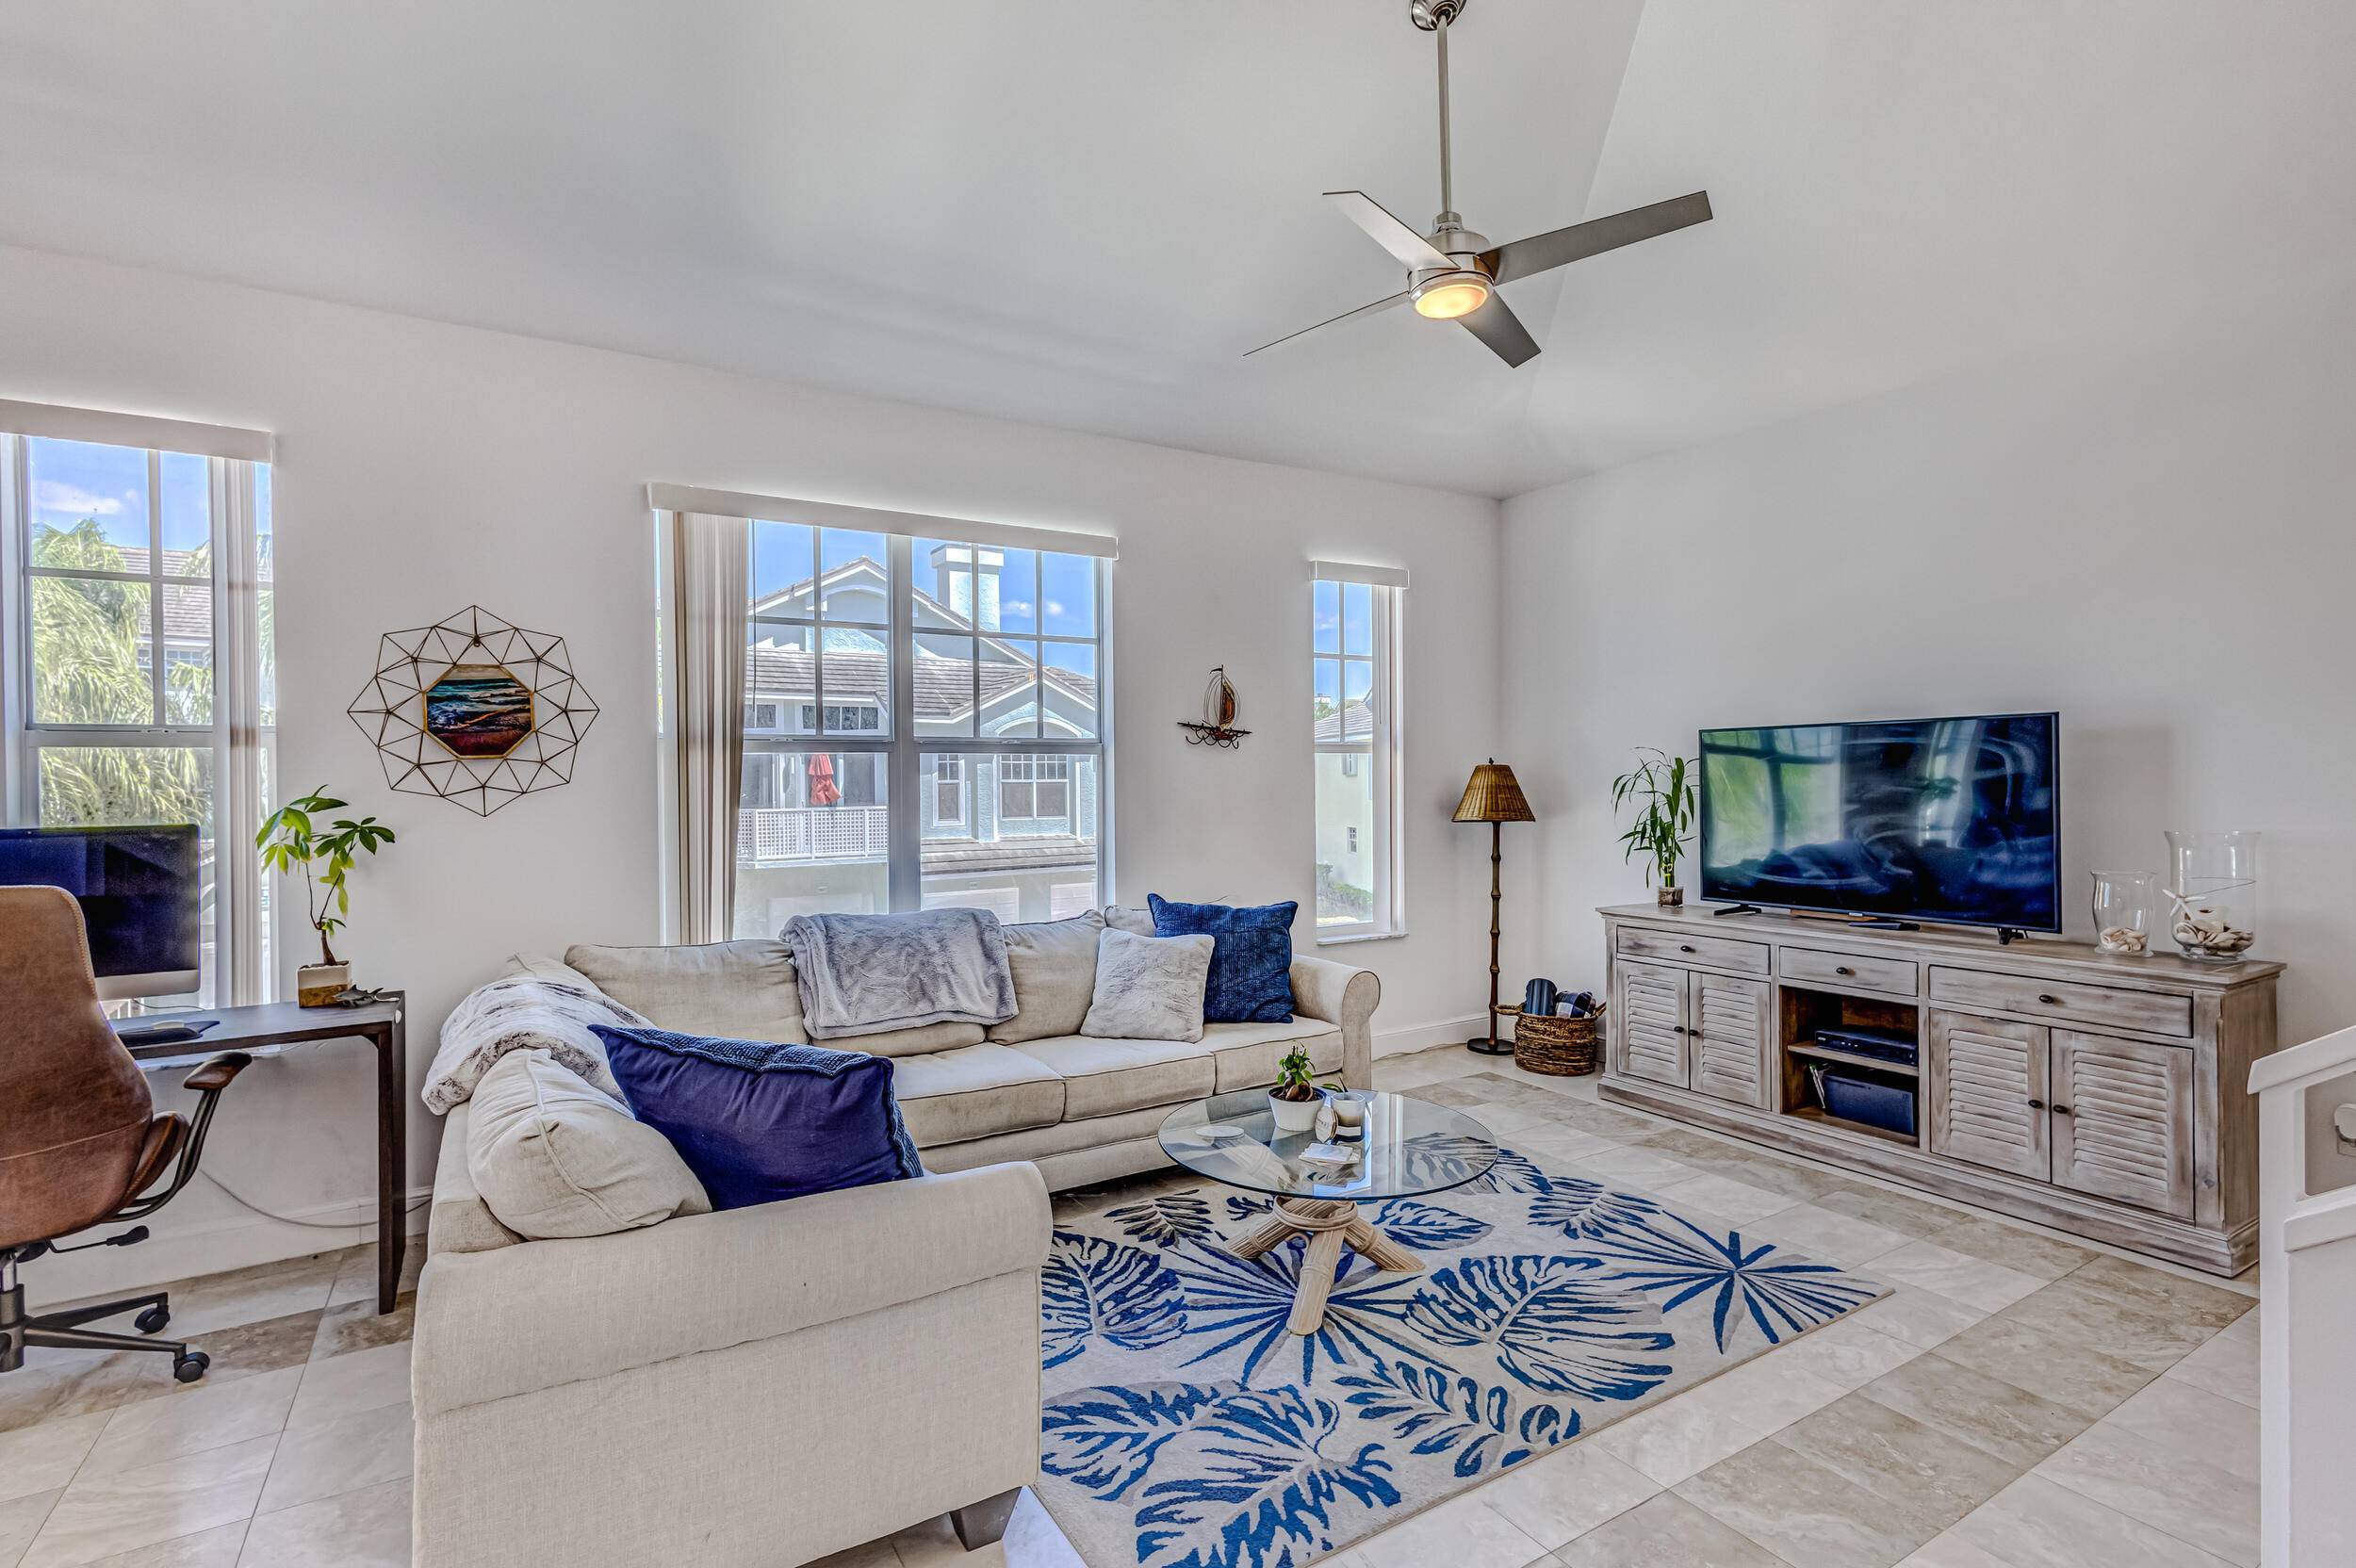 2 Pets allowed in this beautiful pet friendly beachside condo and is just a short stroll to Jupiter's dog friendly beach !